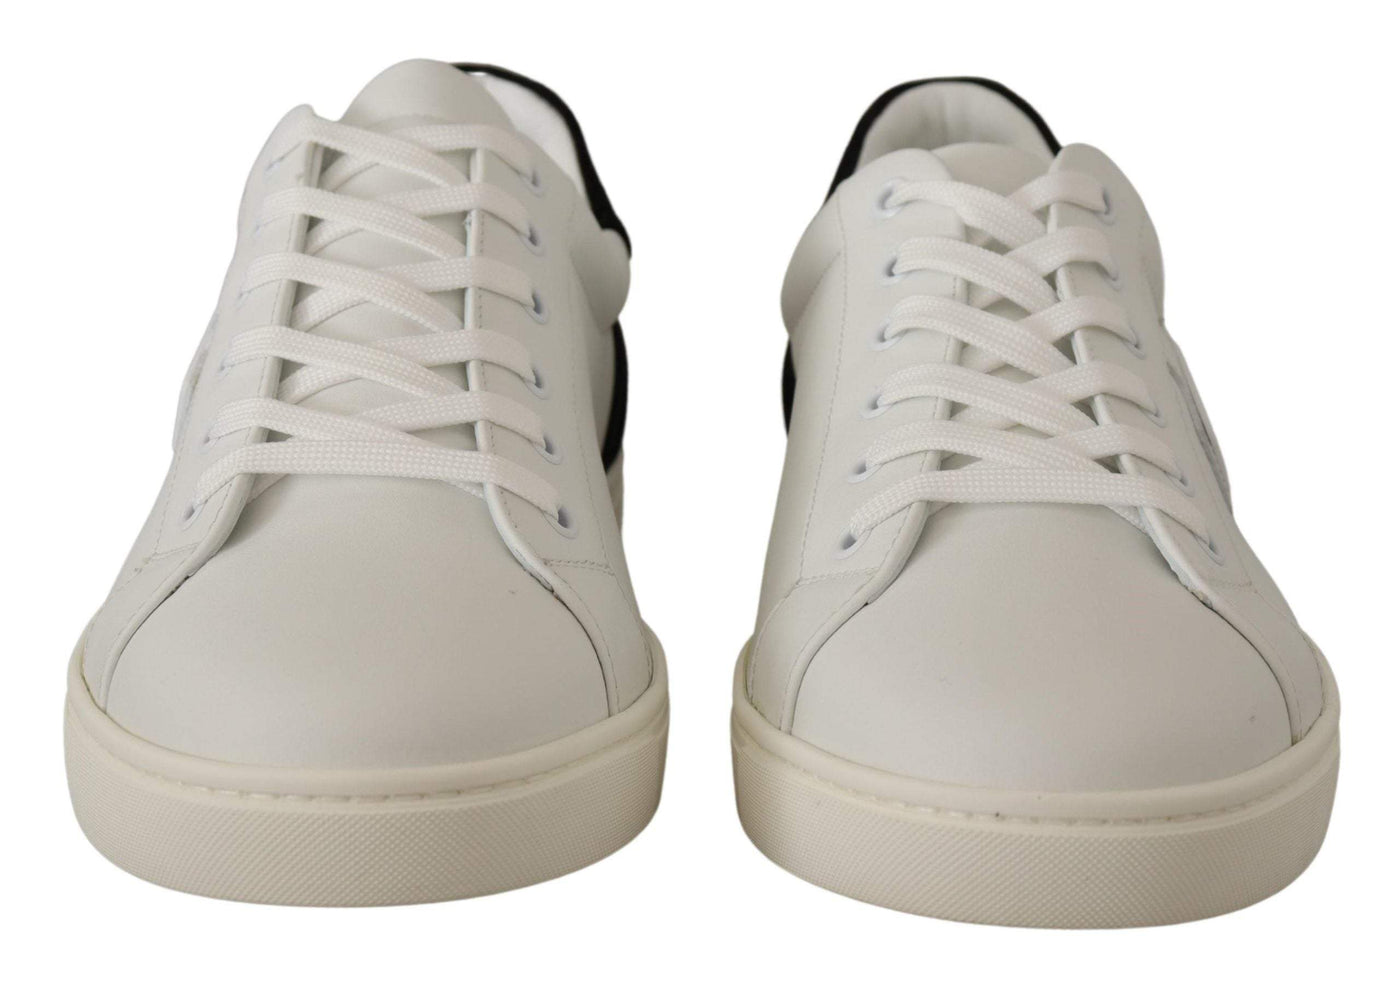 Dolce & Gabbana White Suede Leather Low Tops Sneakers #men, Dolce & Gabbana, EU39.5/US6.5, EU40.5/US7.5, EU40/US7, EU43.5/US10.5, EU44/US11, EU45/US12, feed-1, Sneakers - Men - Shoes, White at SEYMAYKA